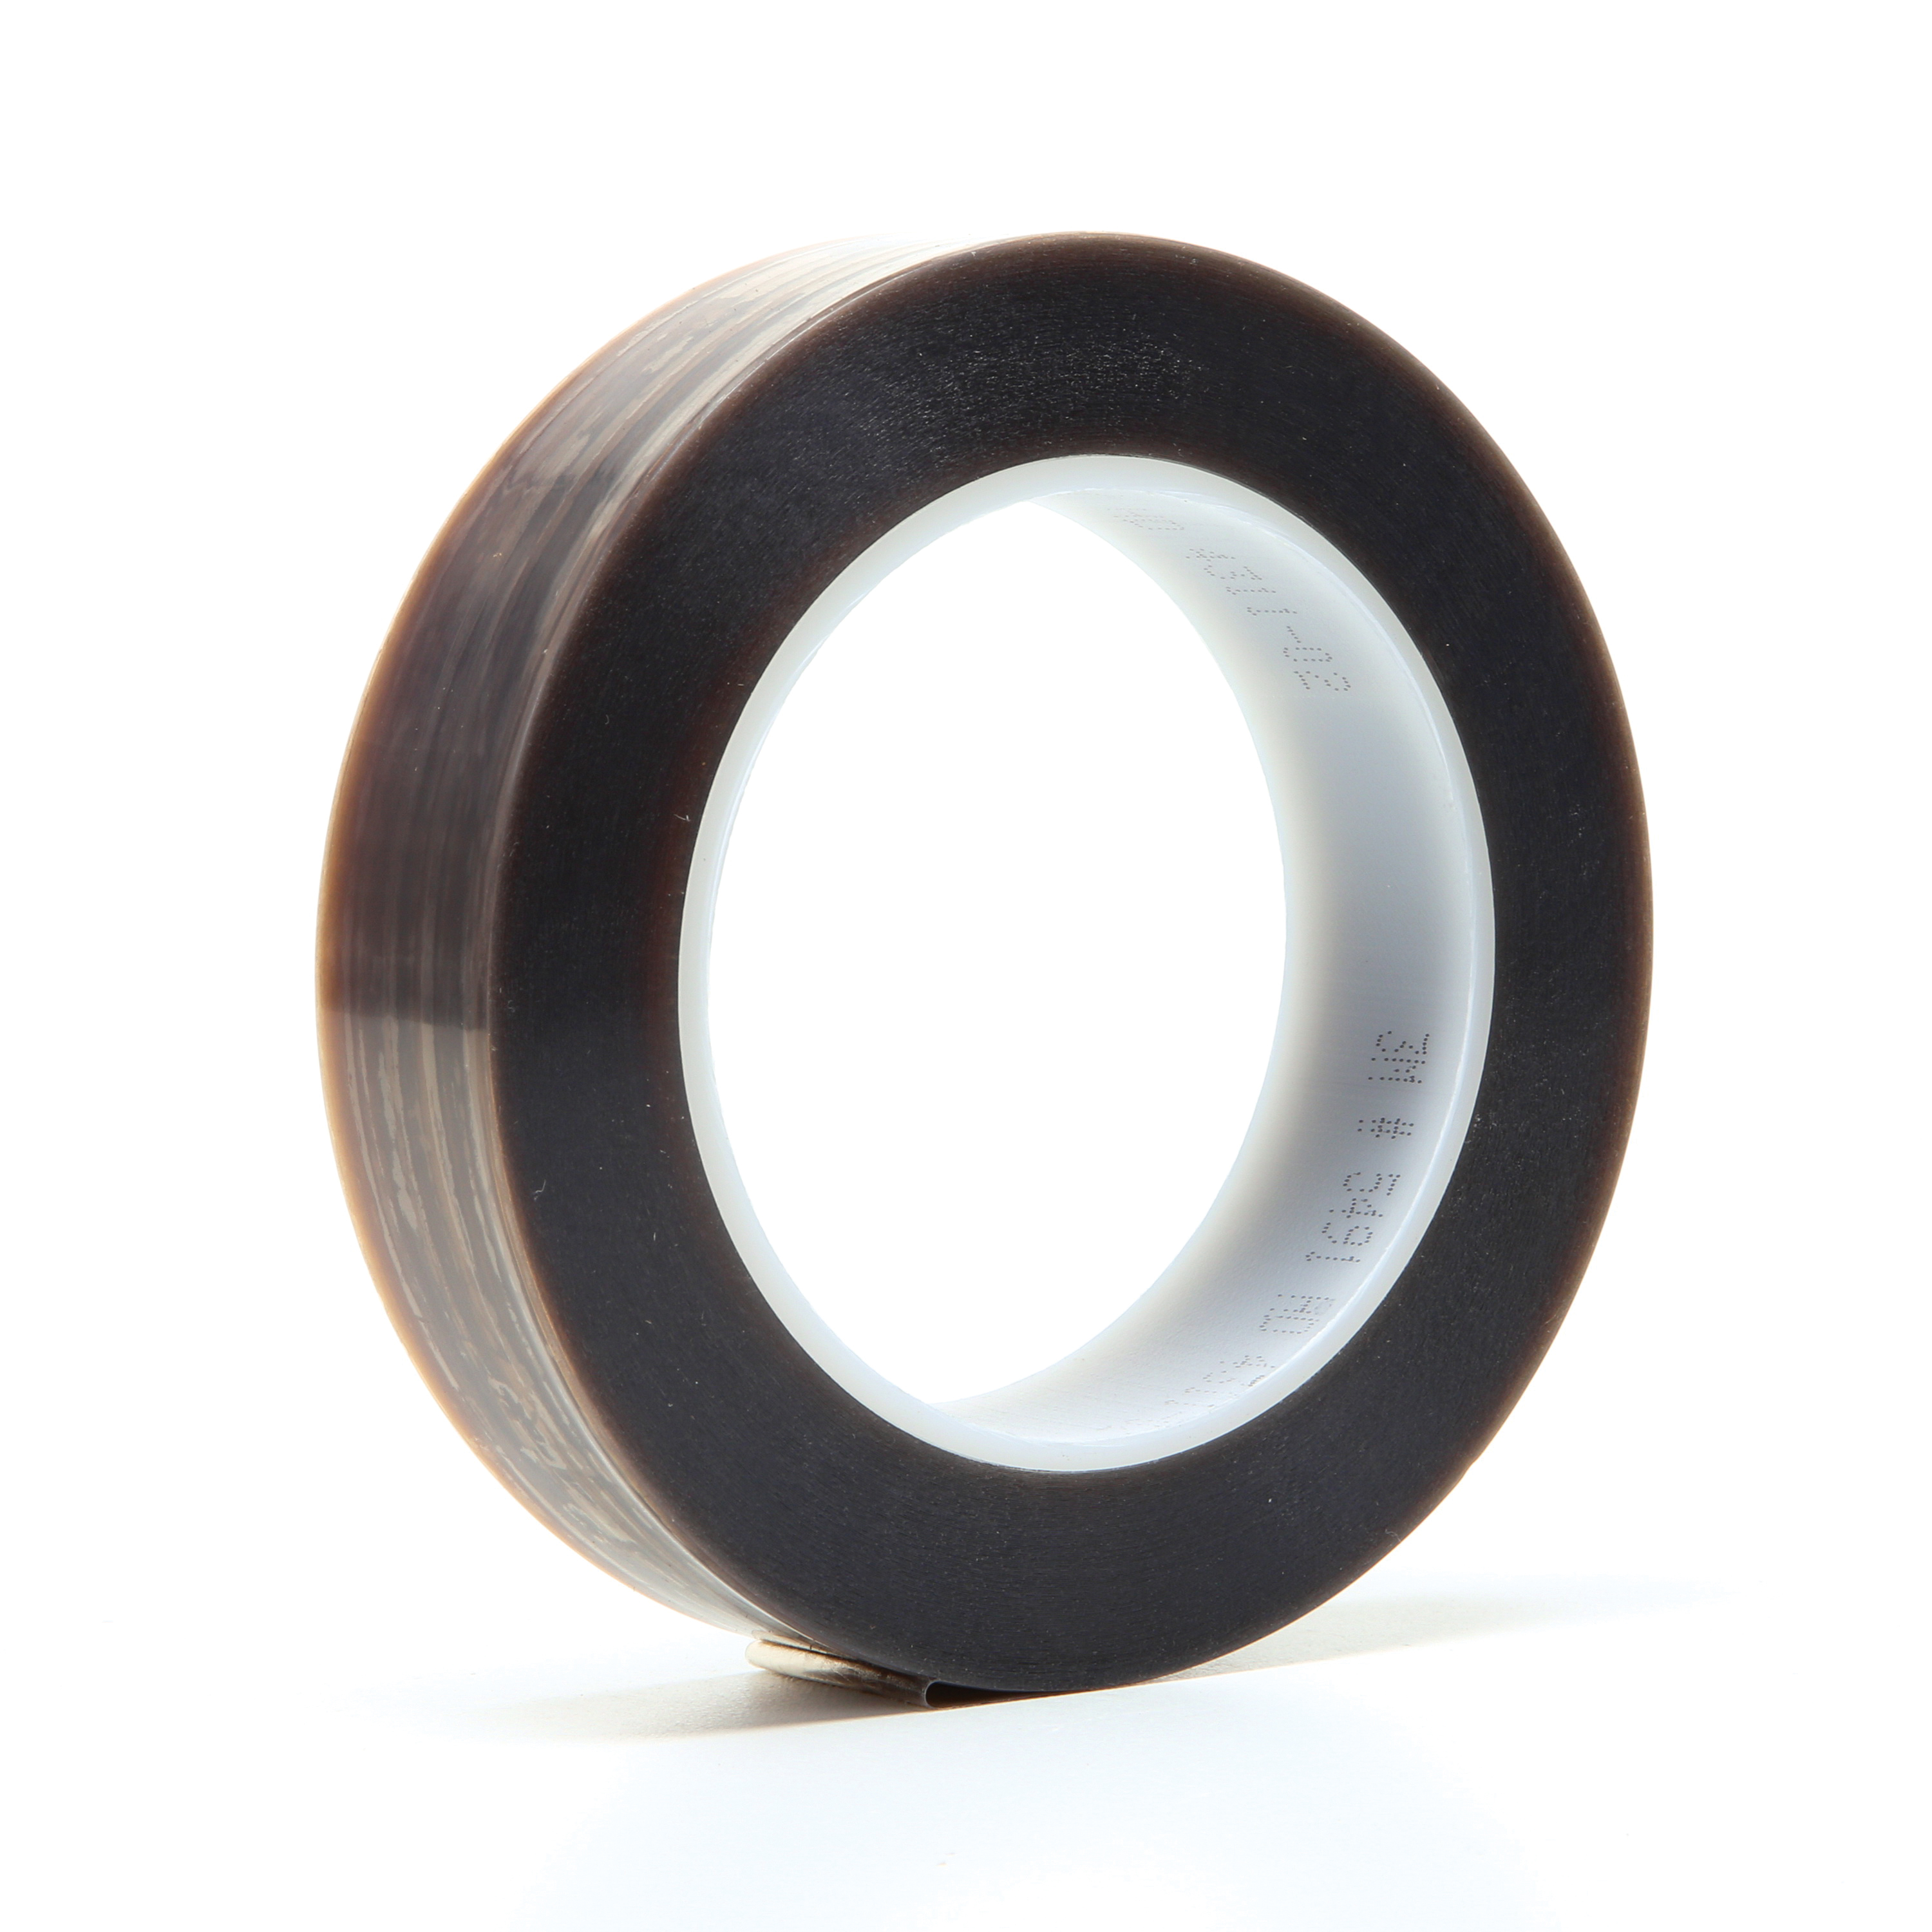 3M™ 021200-16146 Film Tape, 36 yd L x 1 in W, 6.7 mil THK, Silicon Adhesive, Extruded PTFE Backing, Gray